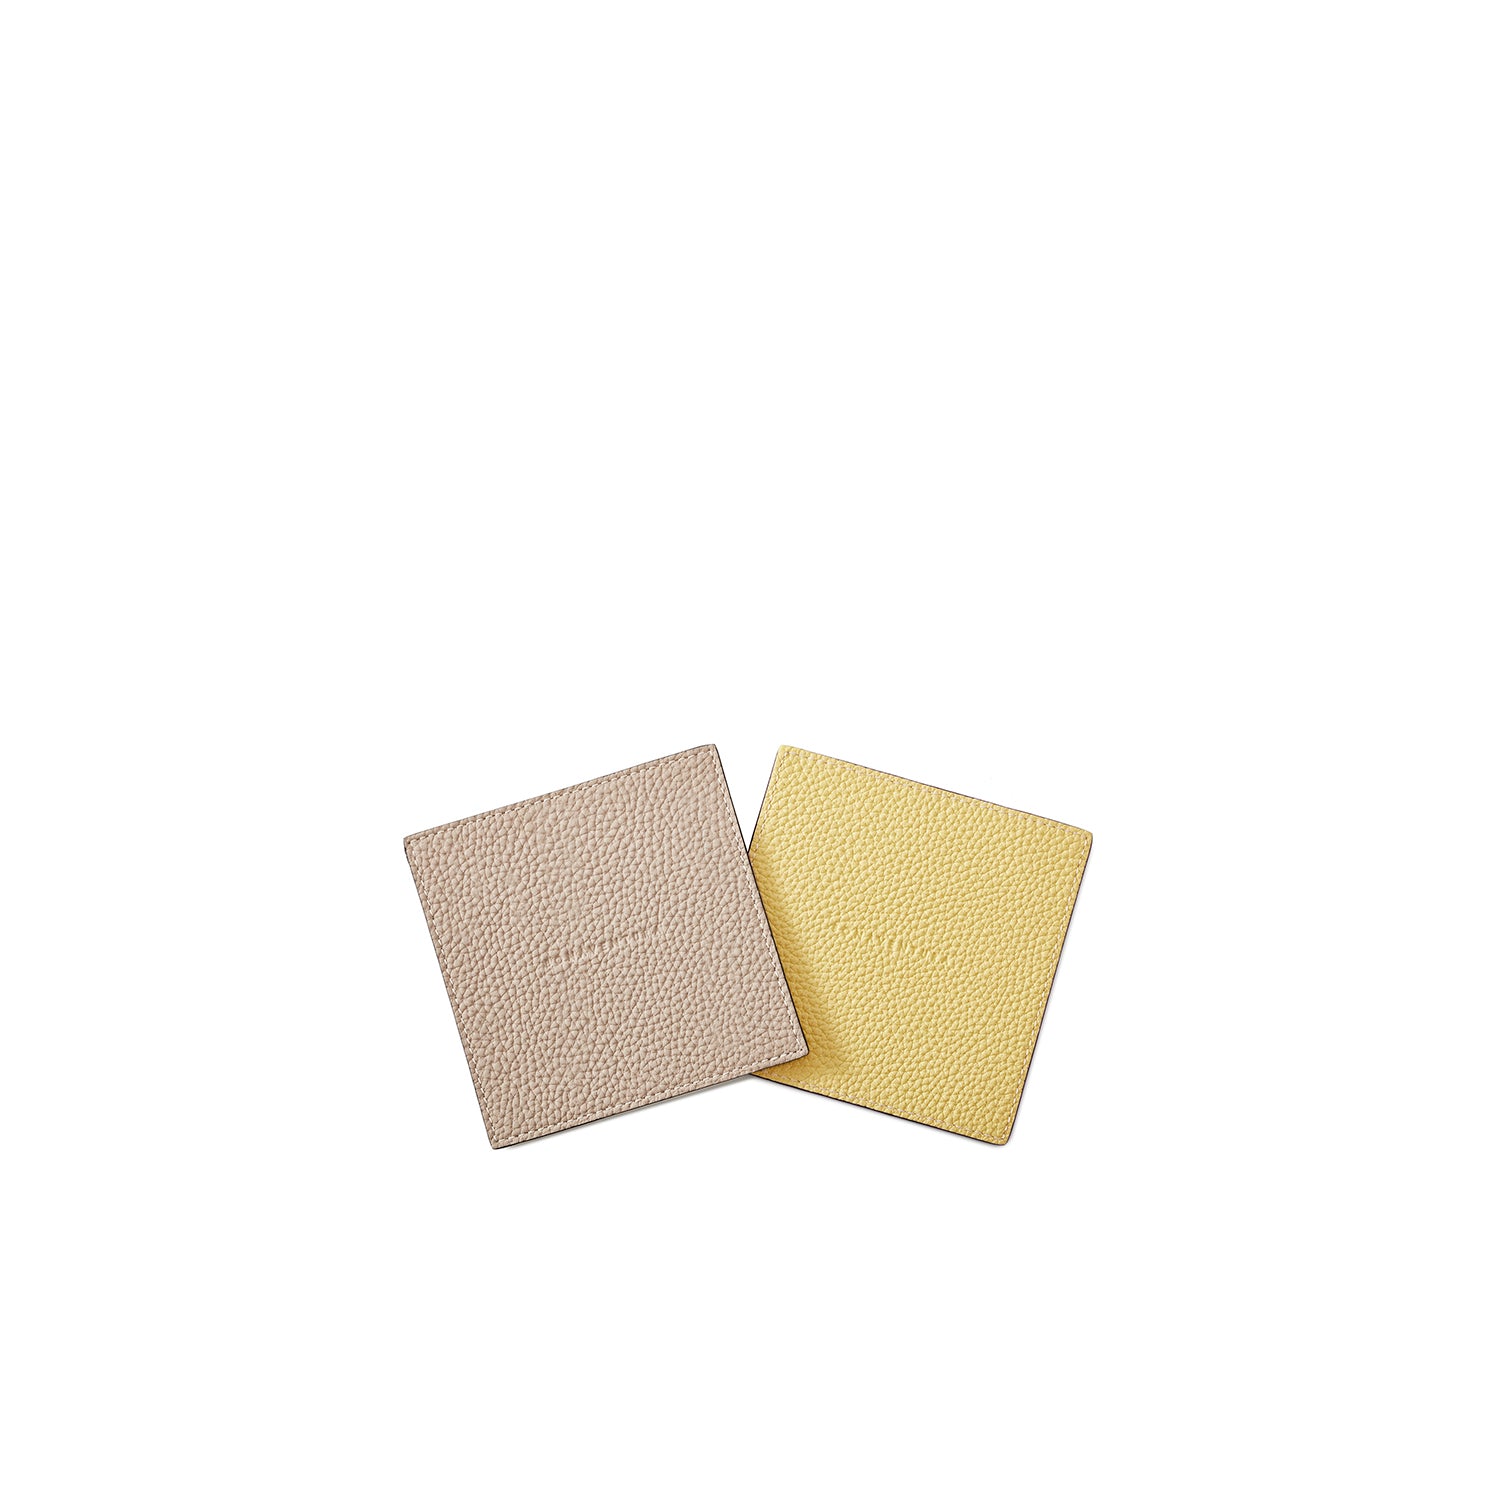 Set of 2 reversible coasters (square) in shrunk leather